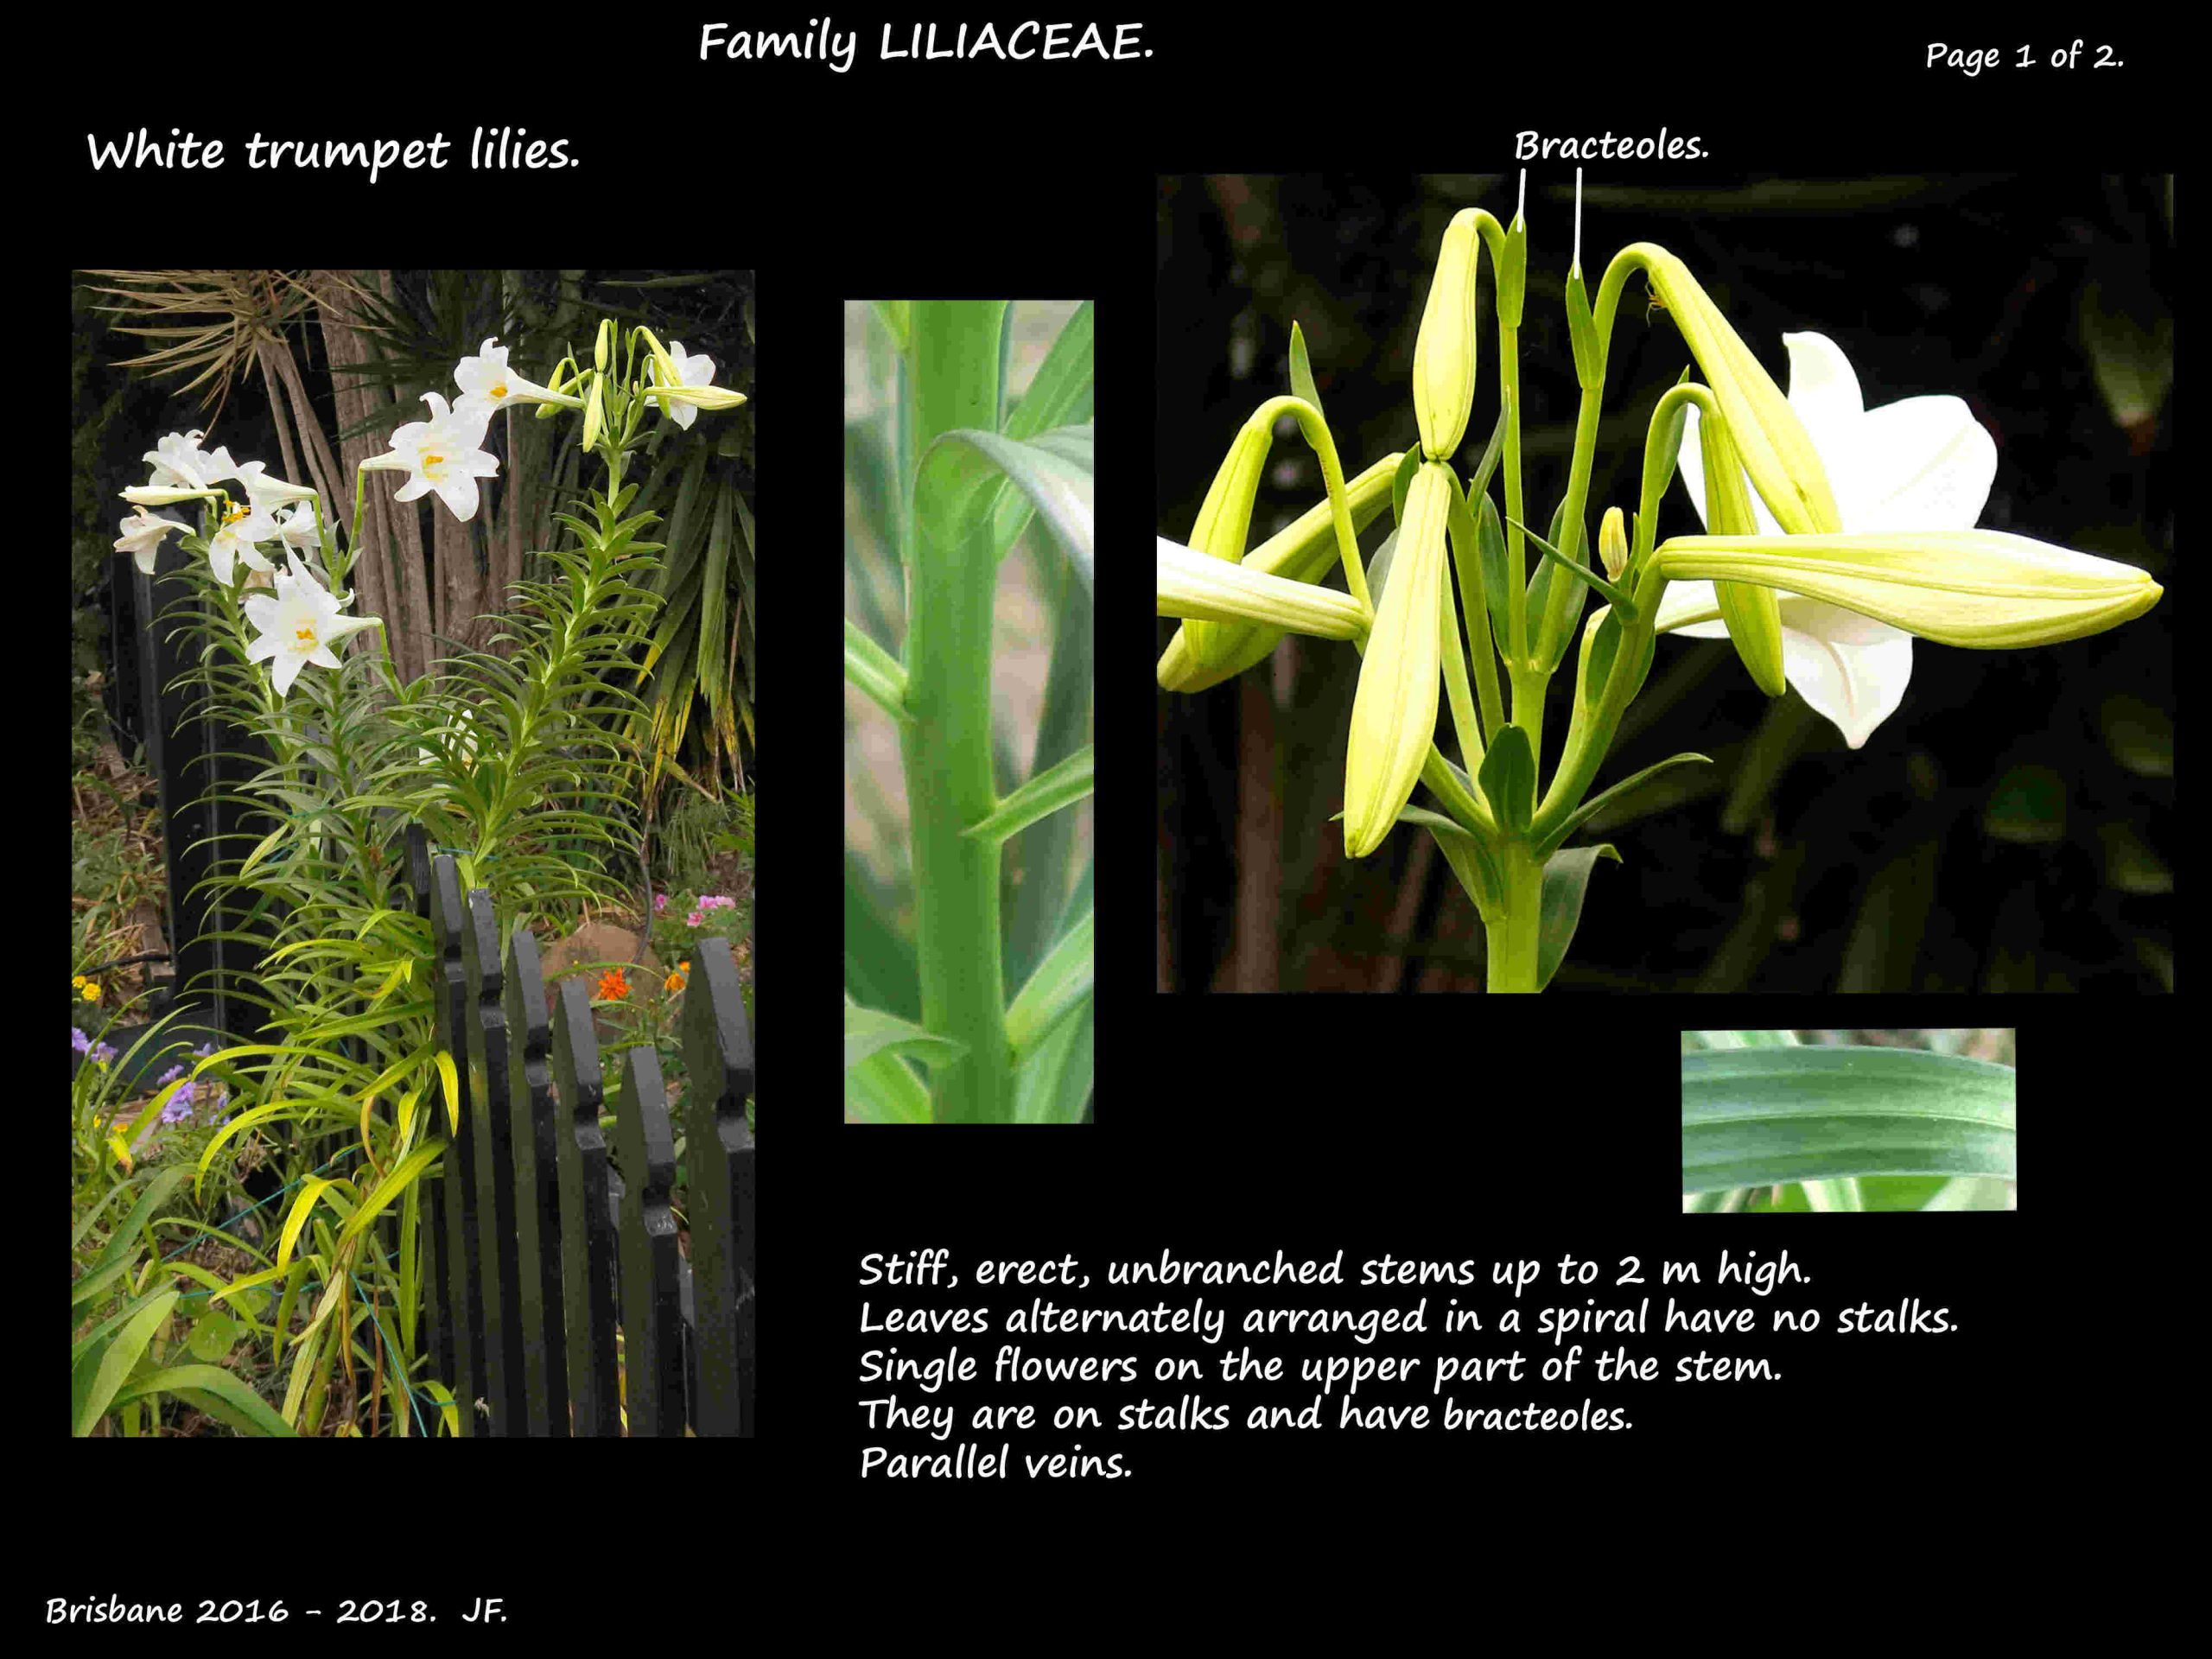 1 White trumpet lily plant & inflorescence